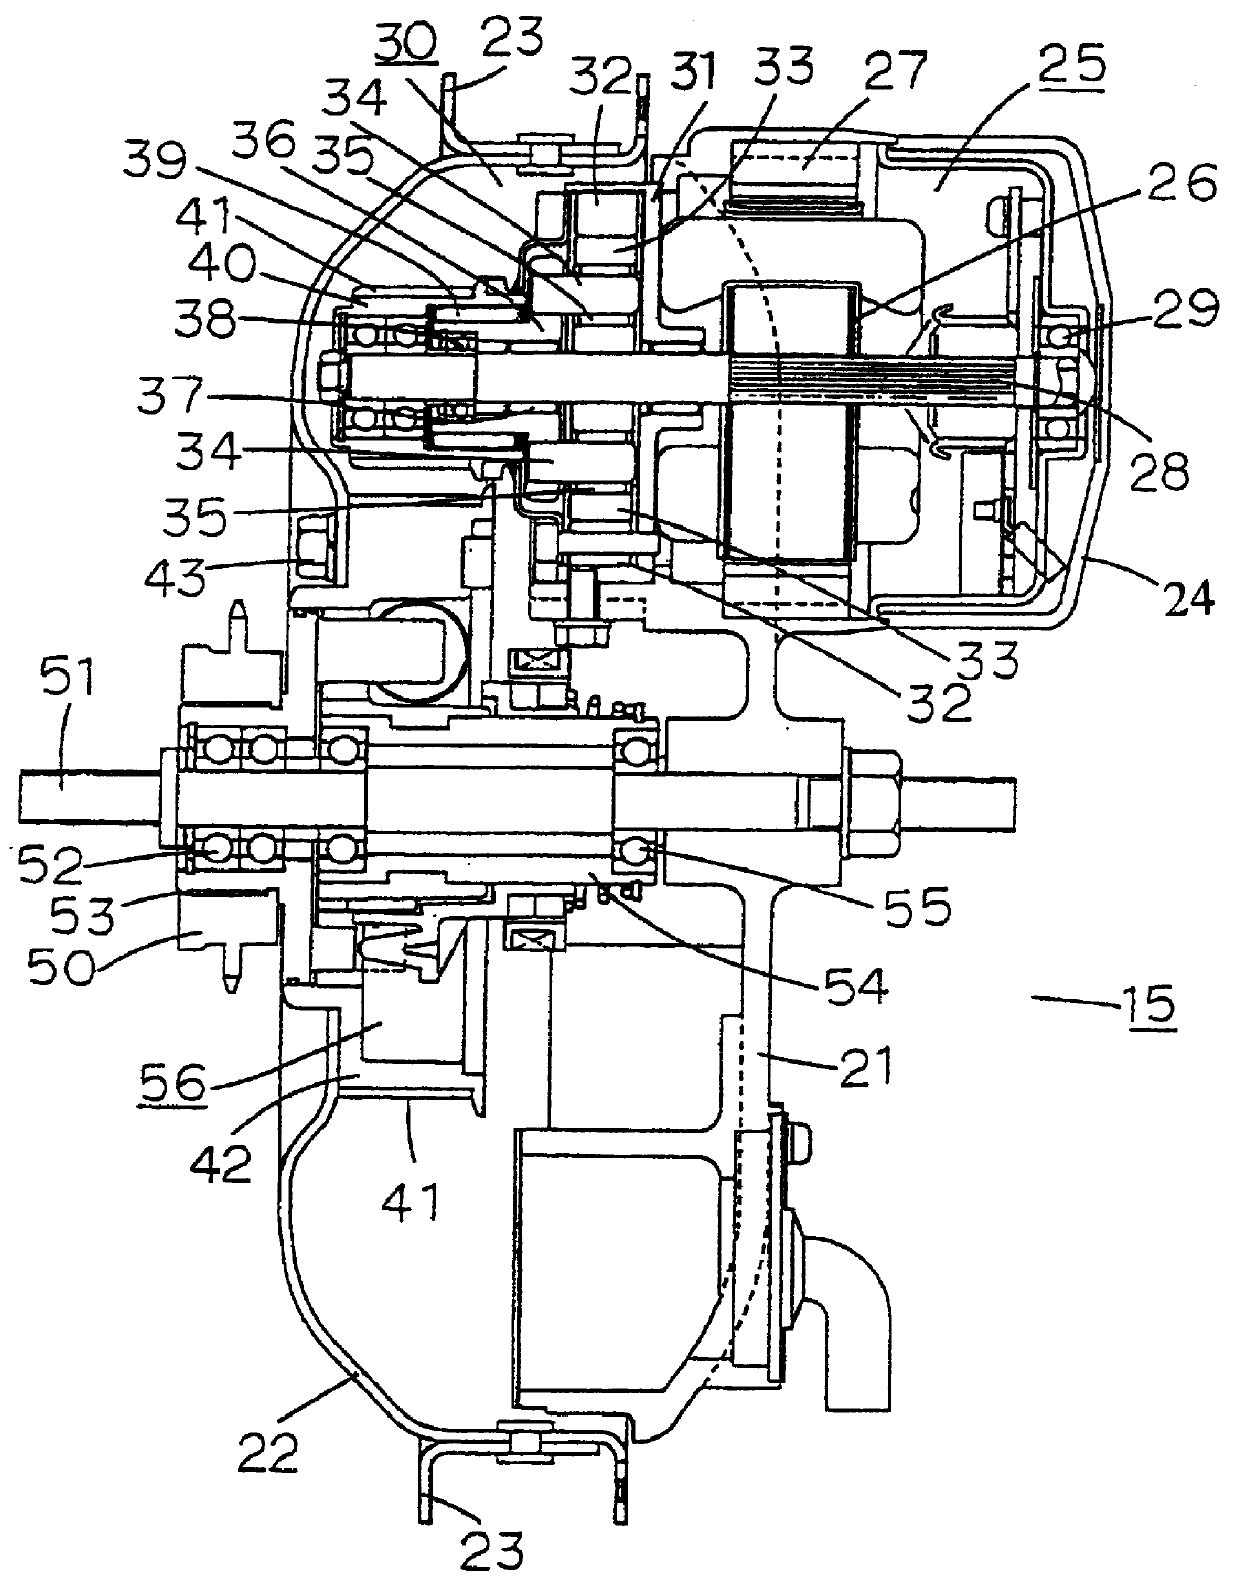 Electrically assisted vehicle